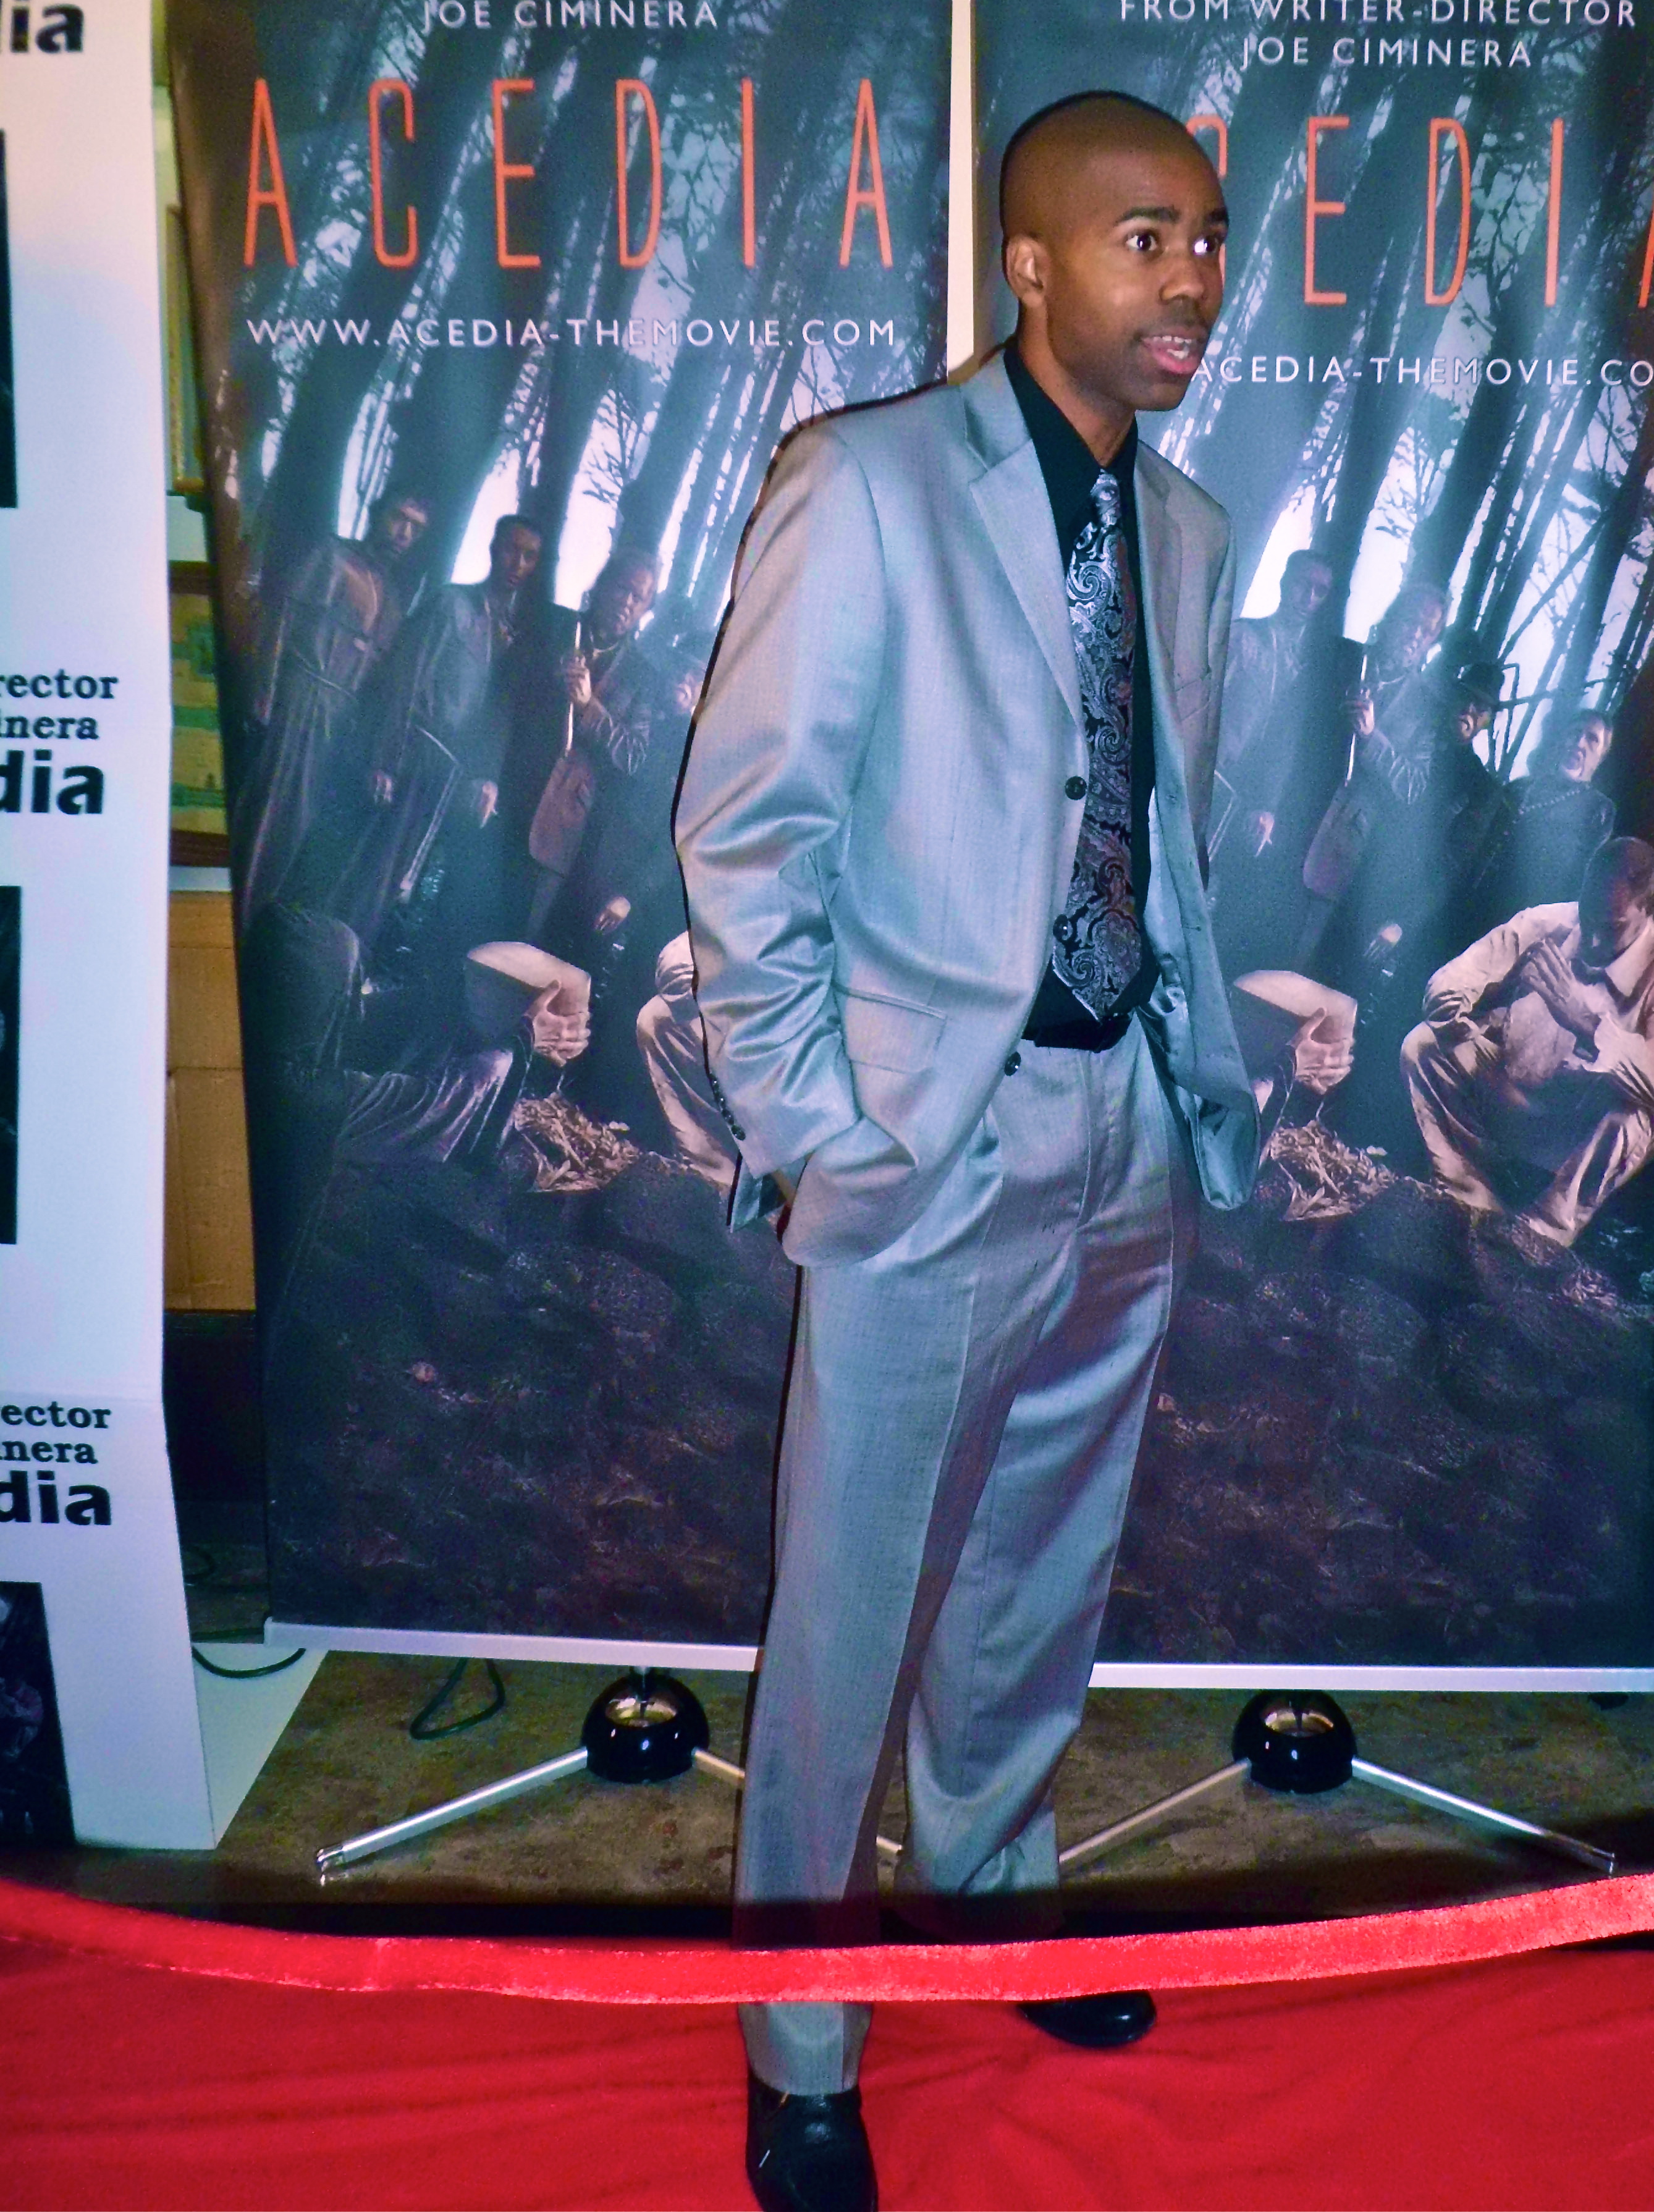 director Michael Ray poses for paparazzi on the red carpet at October 2012 Acedia movie premiere in NYC